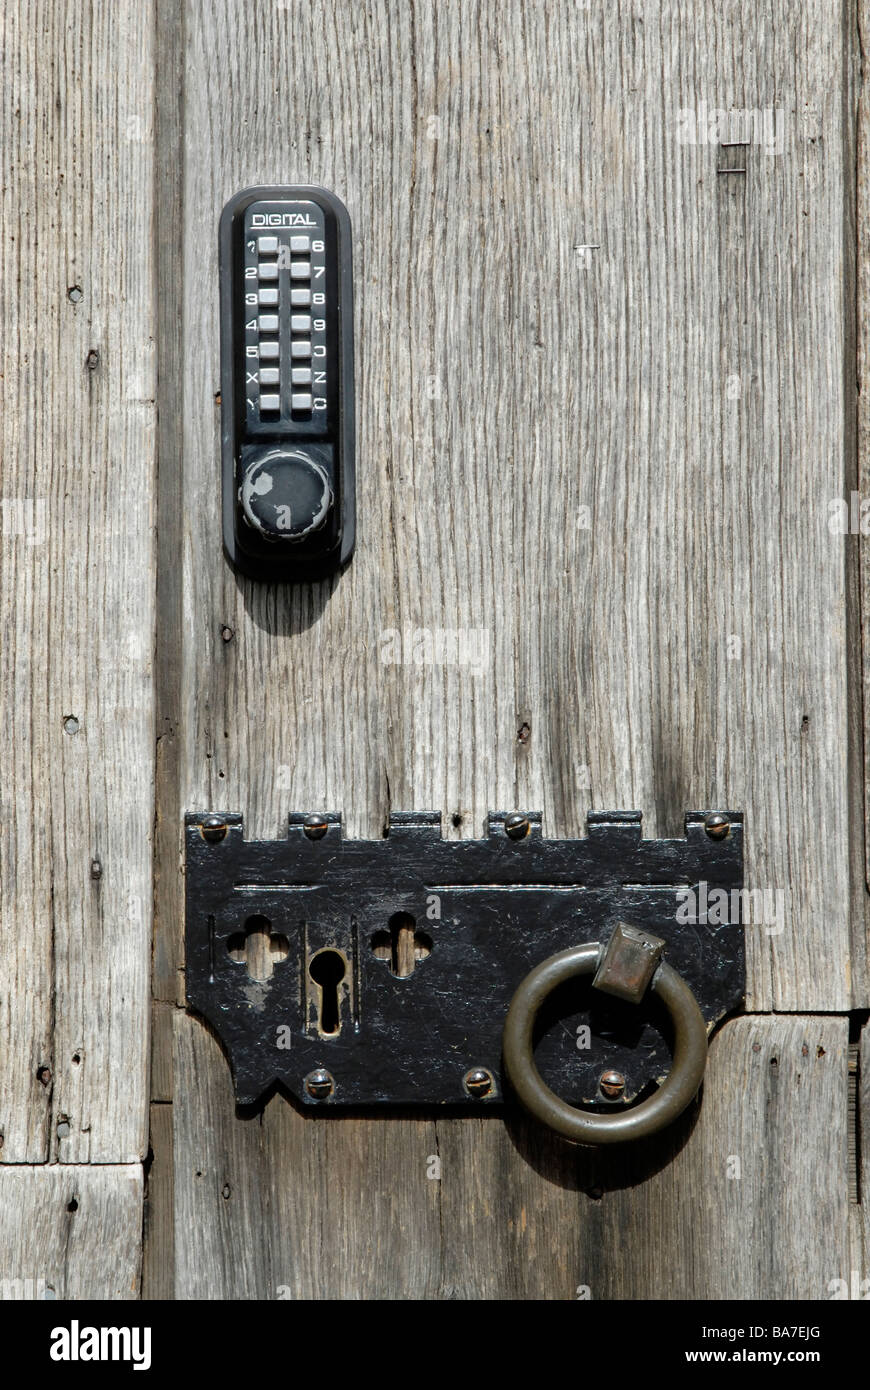 Double security: New digital push button pad lock alongside ancient key operated lock on weathered church door, Winchester Stock Photo